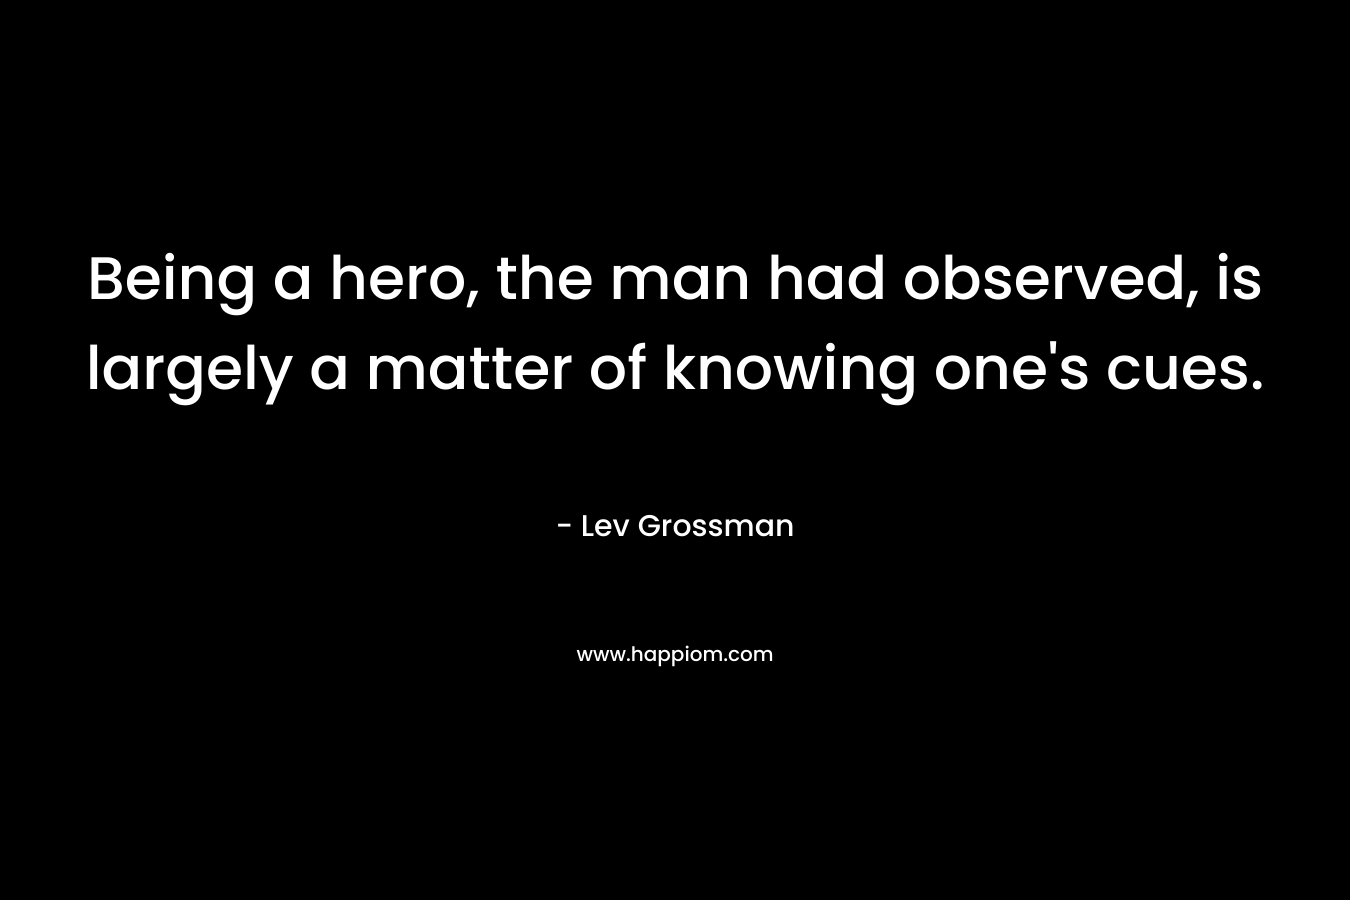 Being a hero, the man had observed, is largely a matter of knowing one's cues.